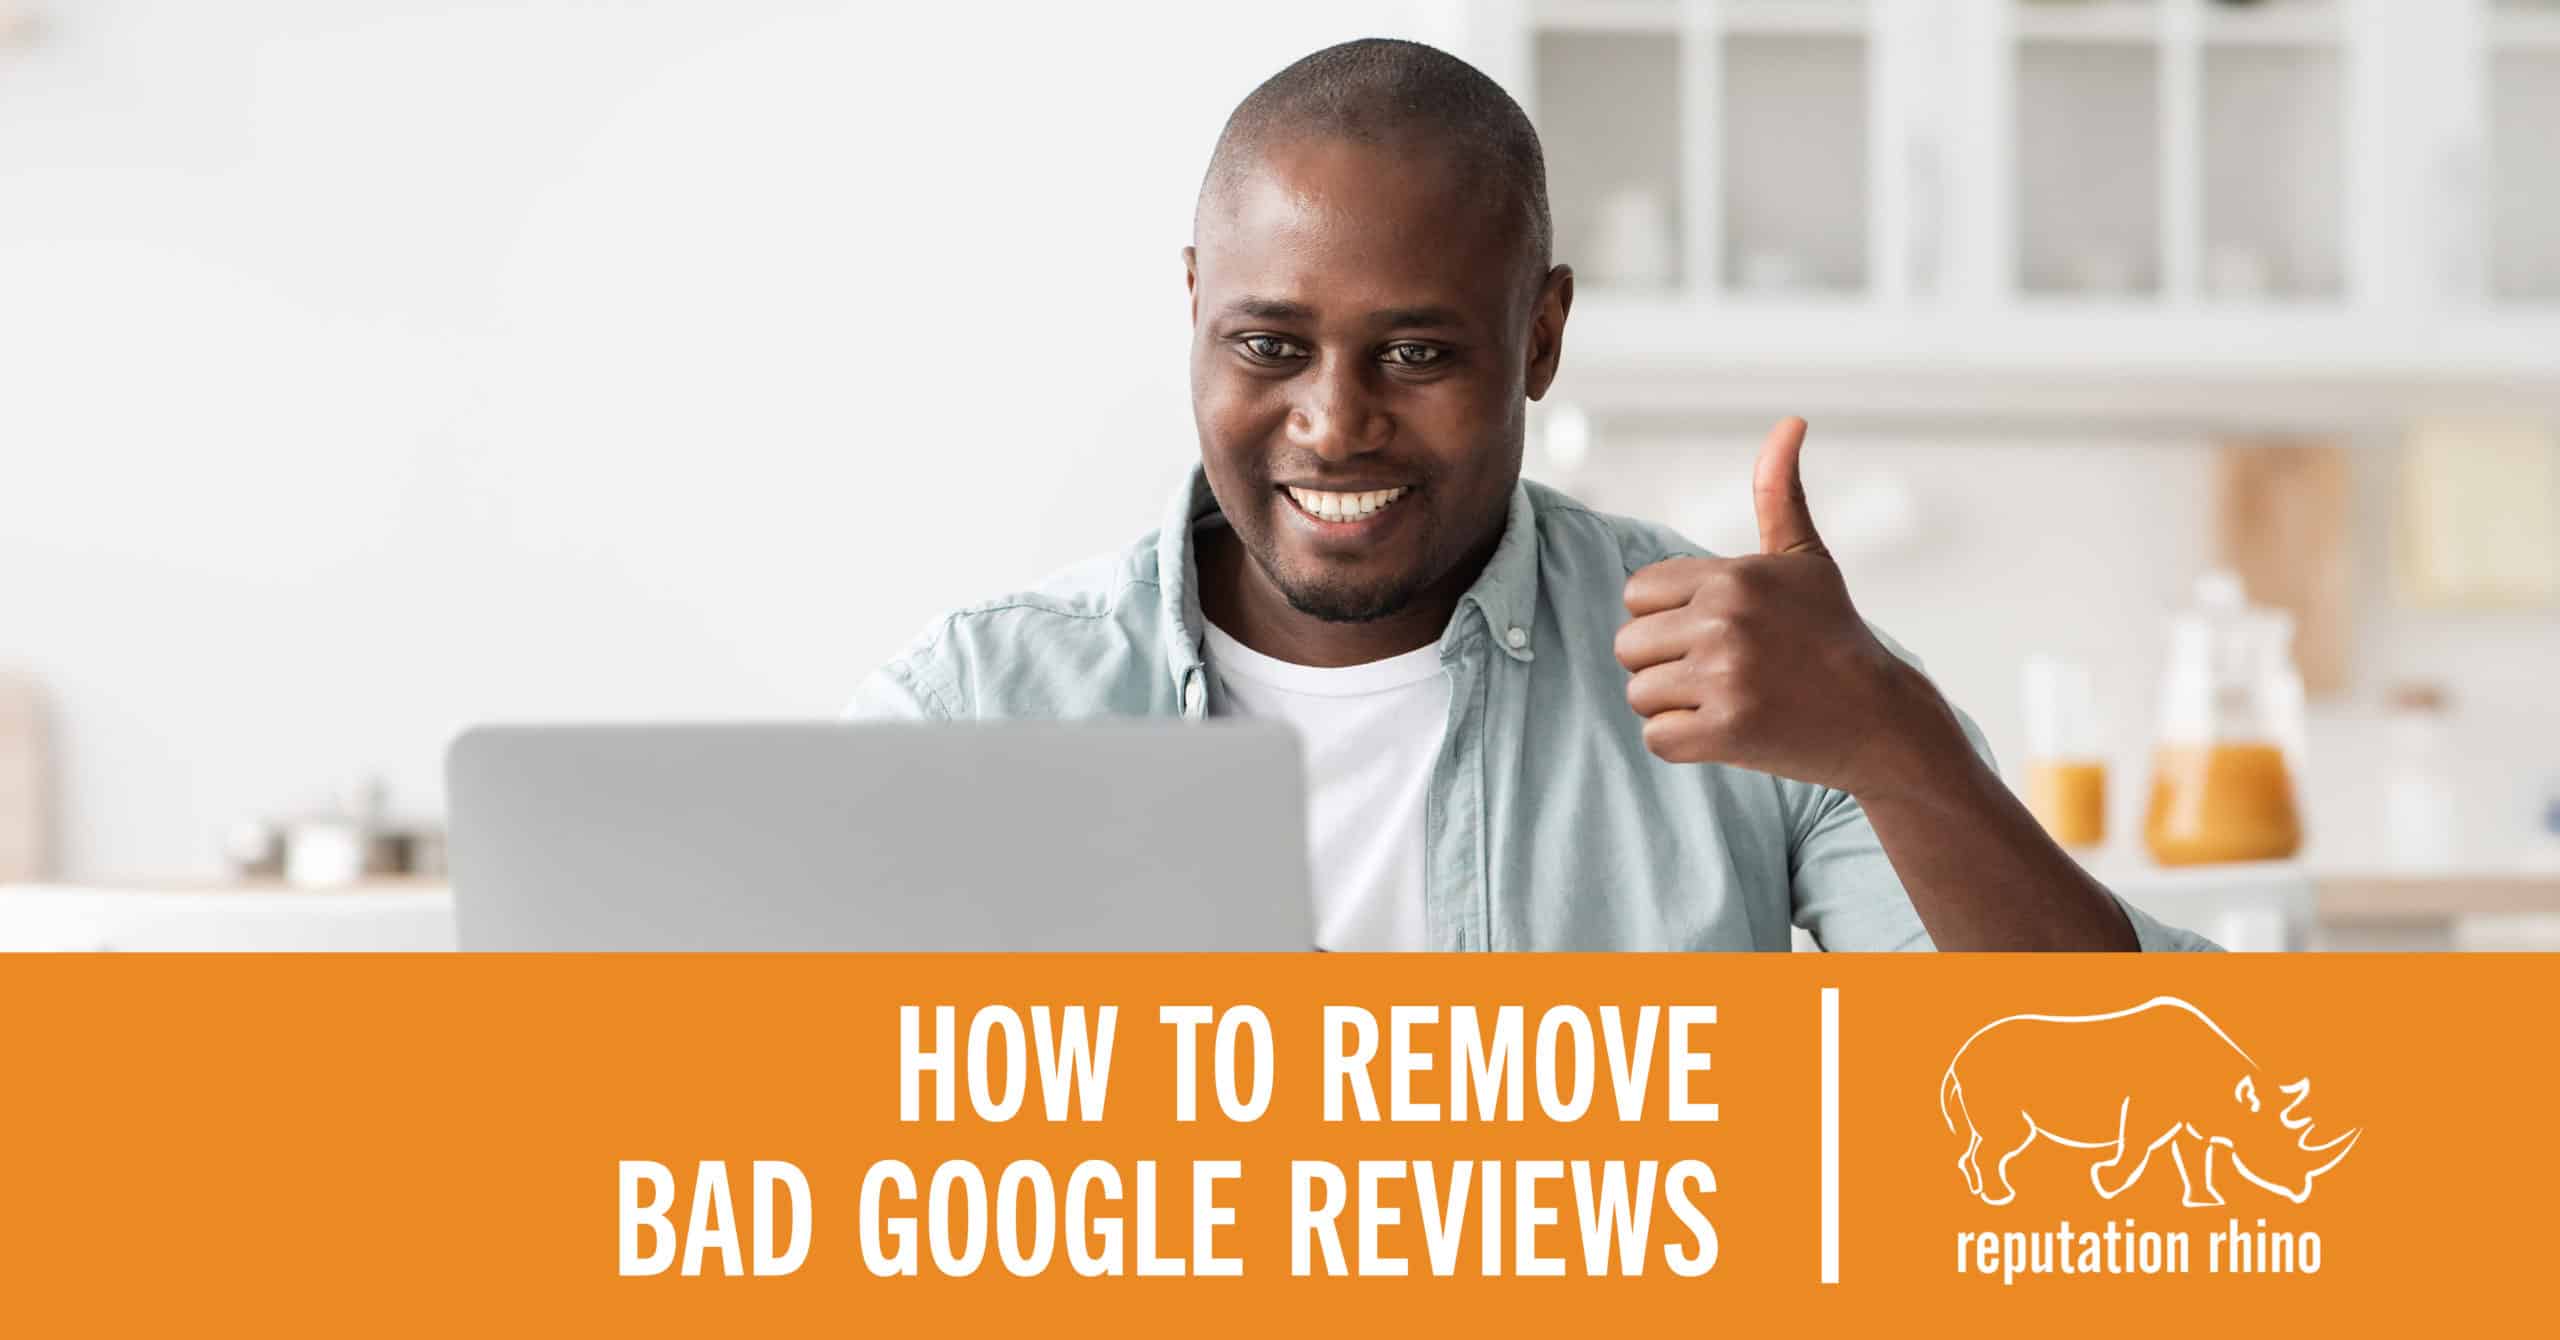 Remove review - man giving thumbs up